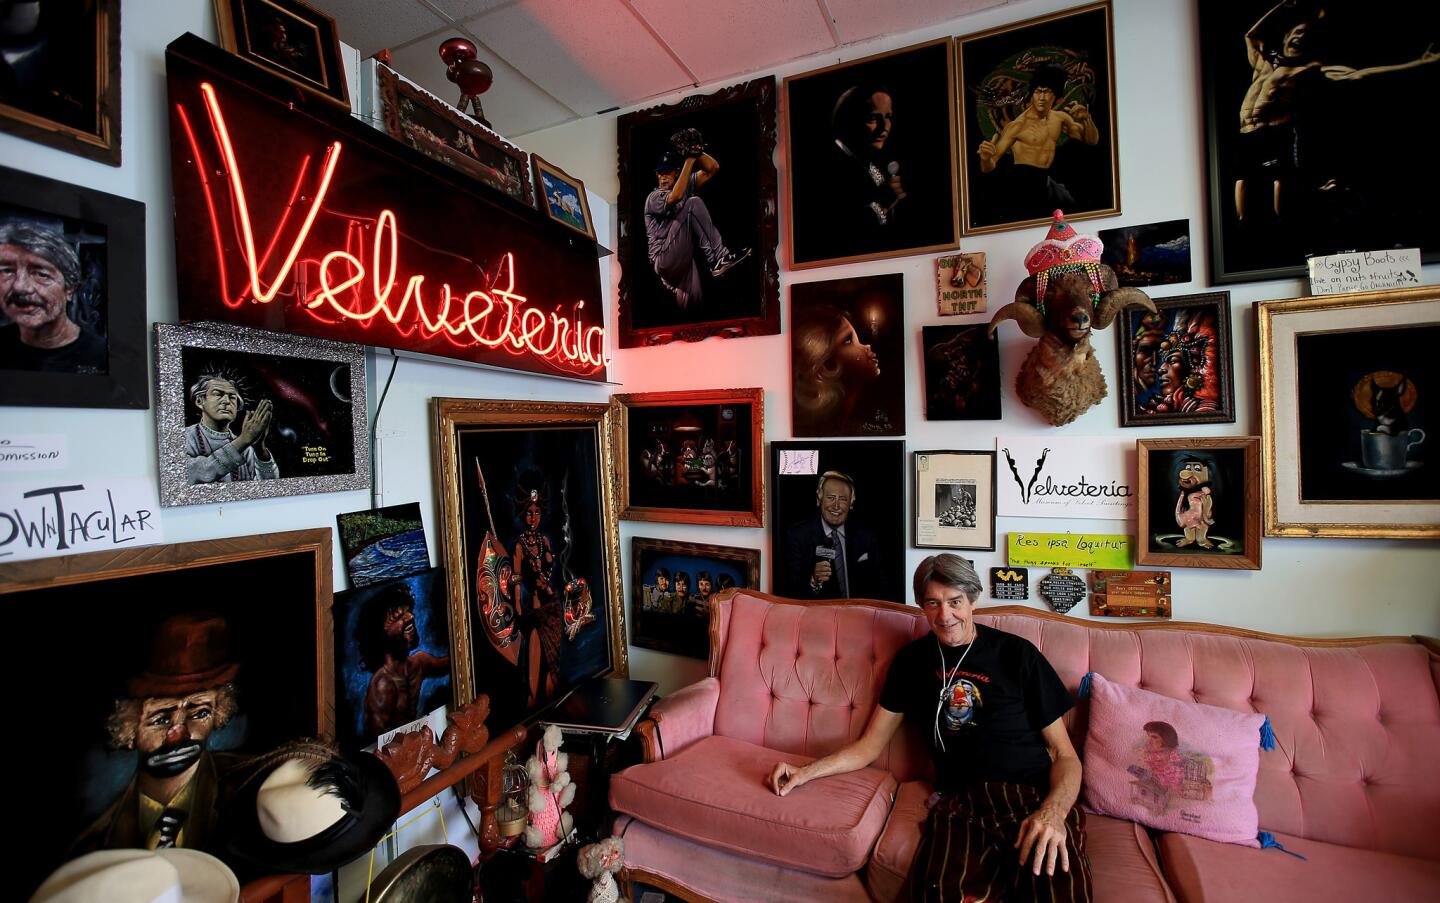 Velveteria is the brainchild of native Angeleno Carl Baldwin (pictured here), who first launched the museum in Portland, Ore., with his partner Caren Anderson. They moved it to L.A. in 2013.